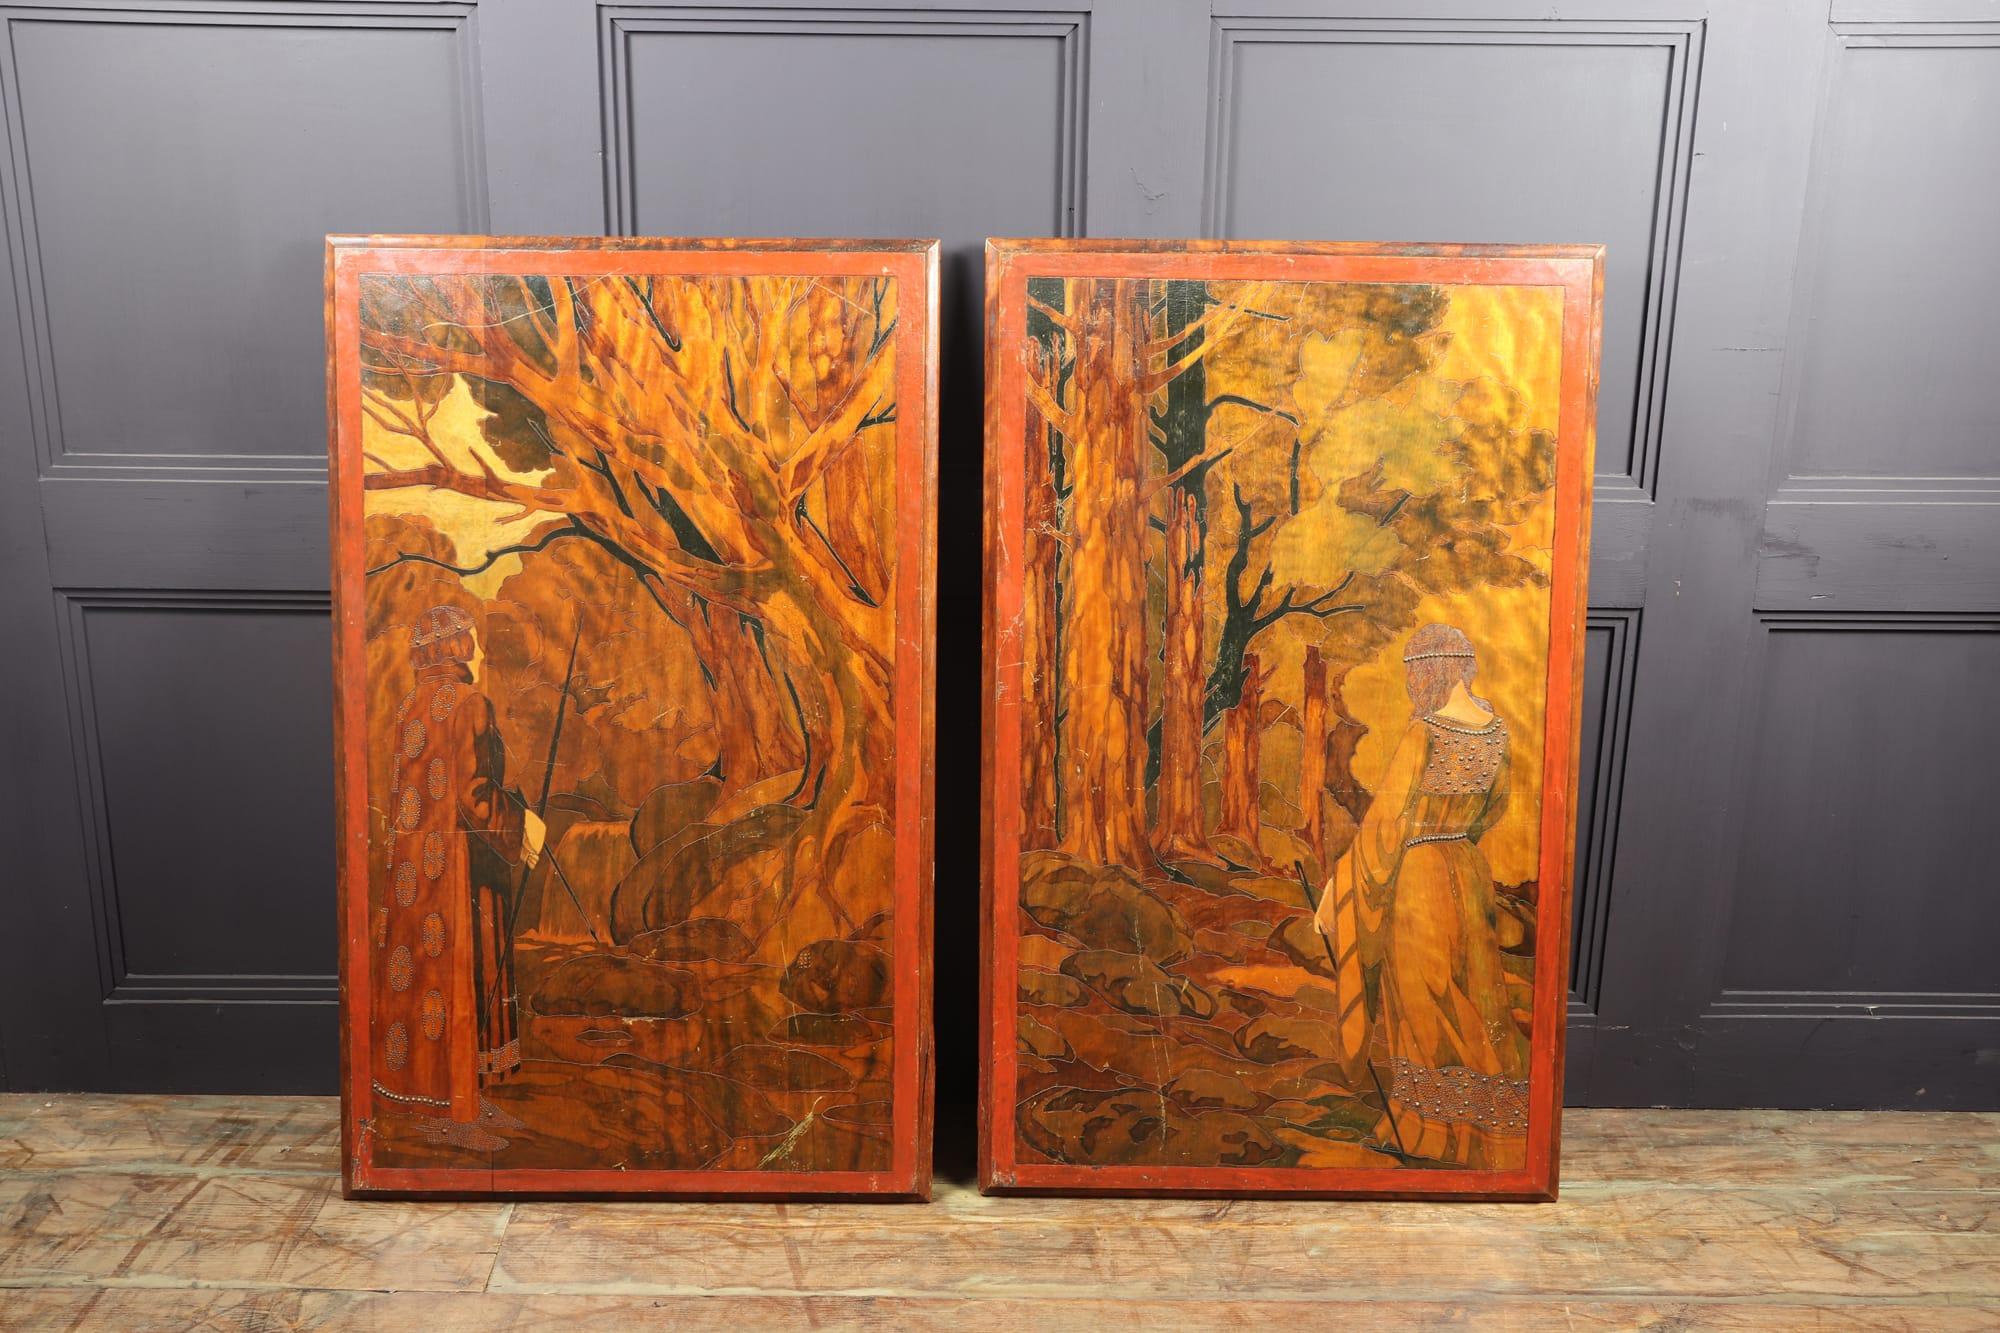 A pair of solid wood pyrography pictures with inlay and stud-work, age related wear produced in France around 1900 original condition

Age: 1900

Style: Art Nouveau

Material: Wooden Panels

Origin : France

Condition: Age related